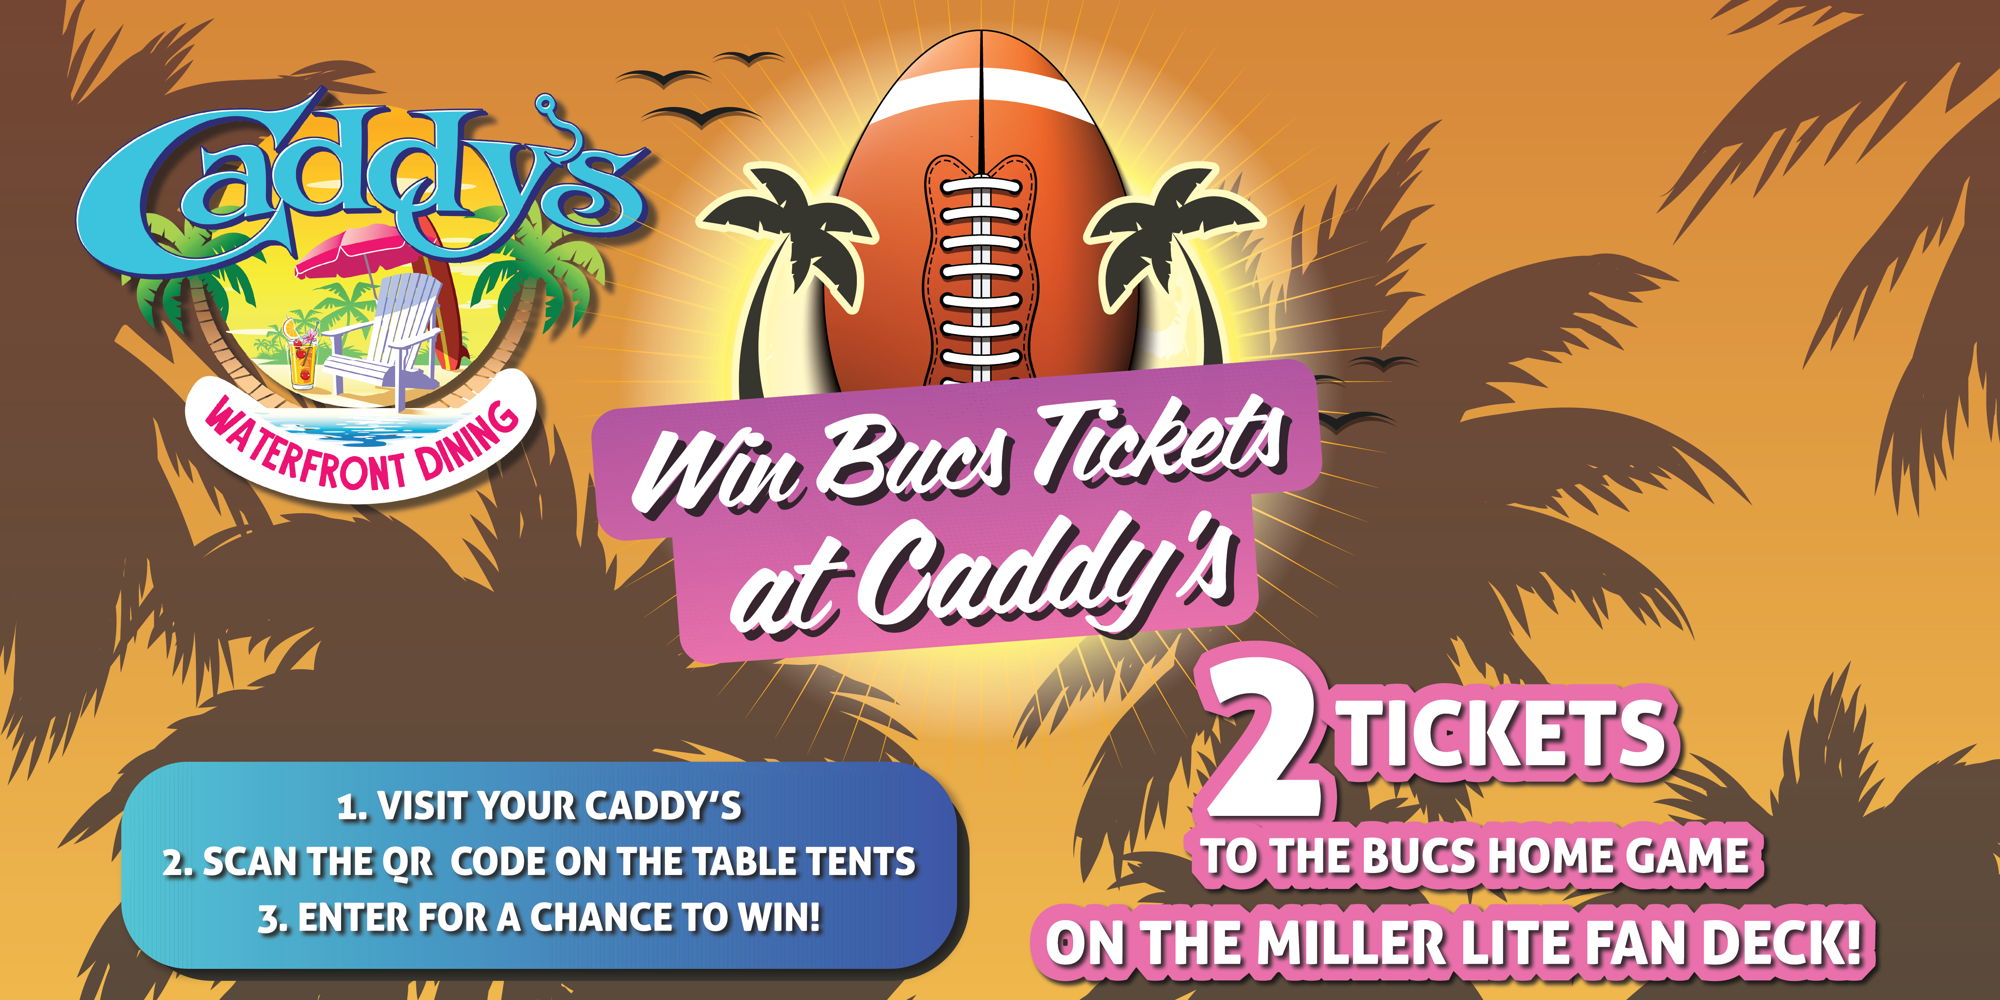 Win Bucs Tickets at Caddy’s! promotional image